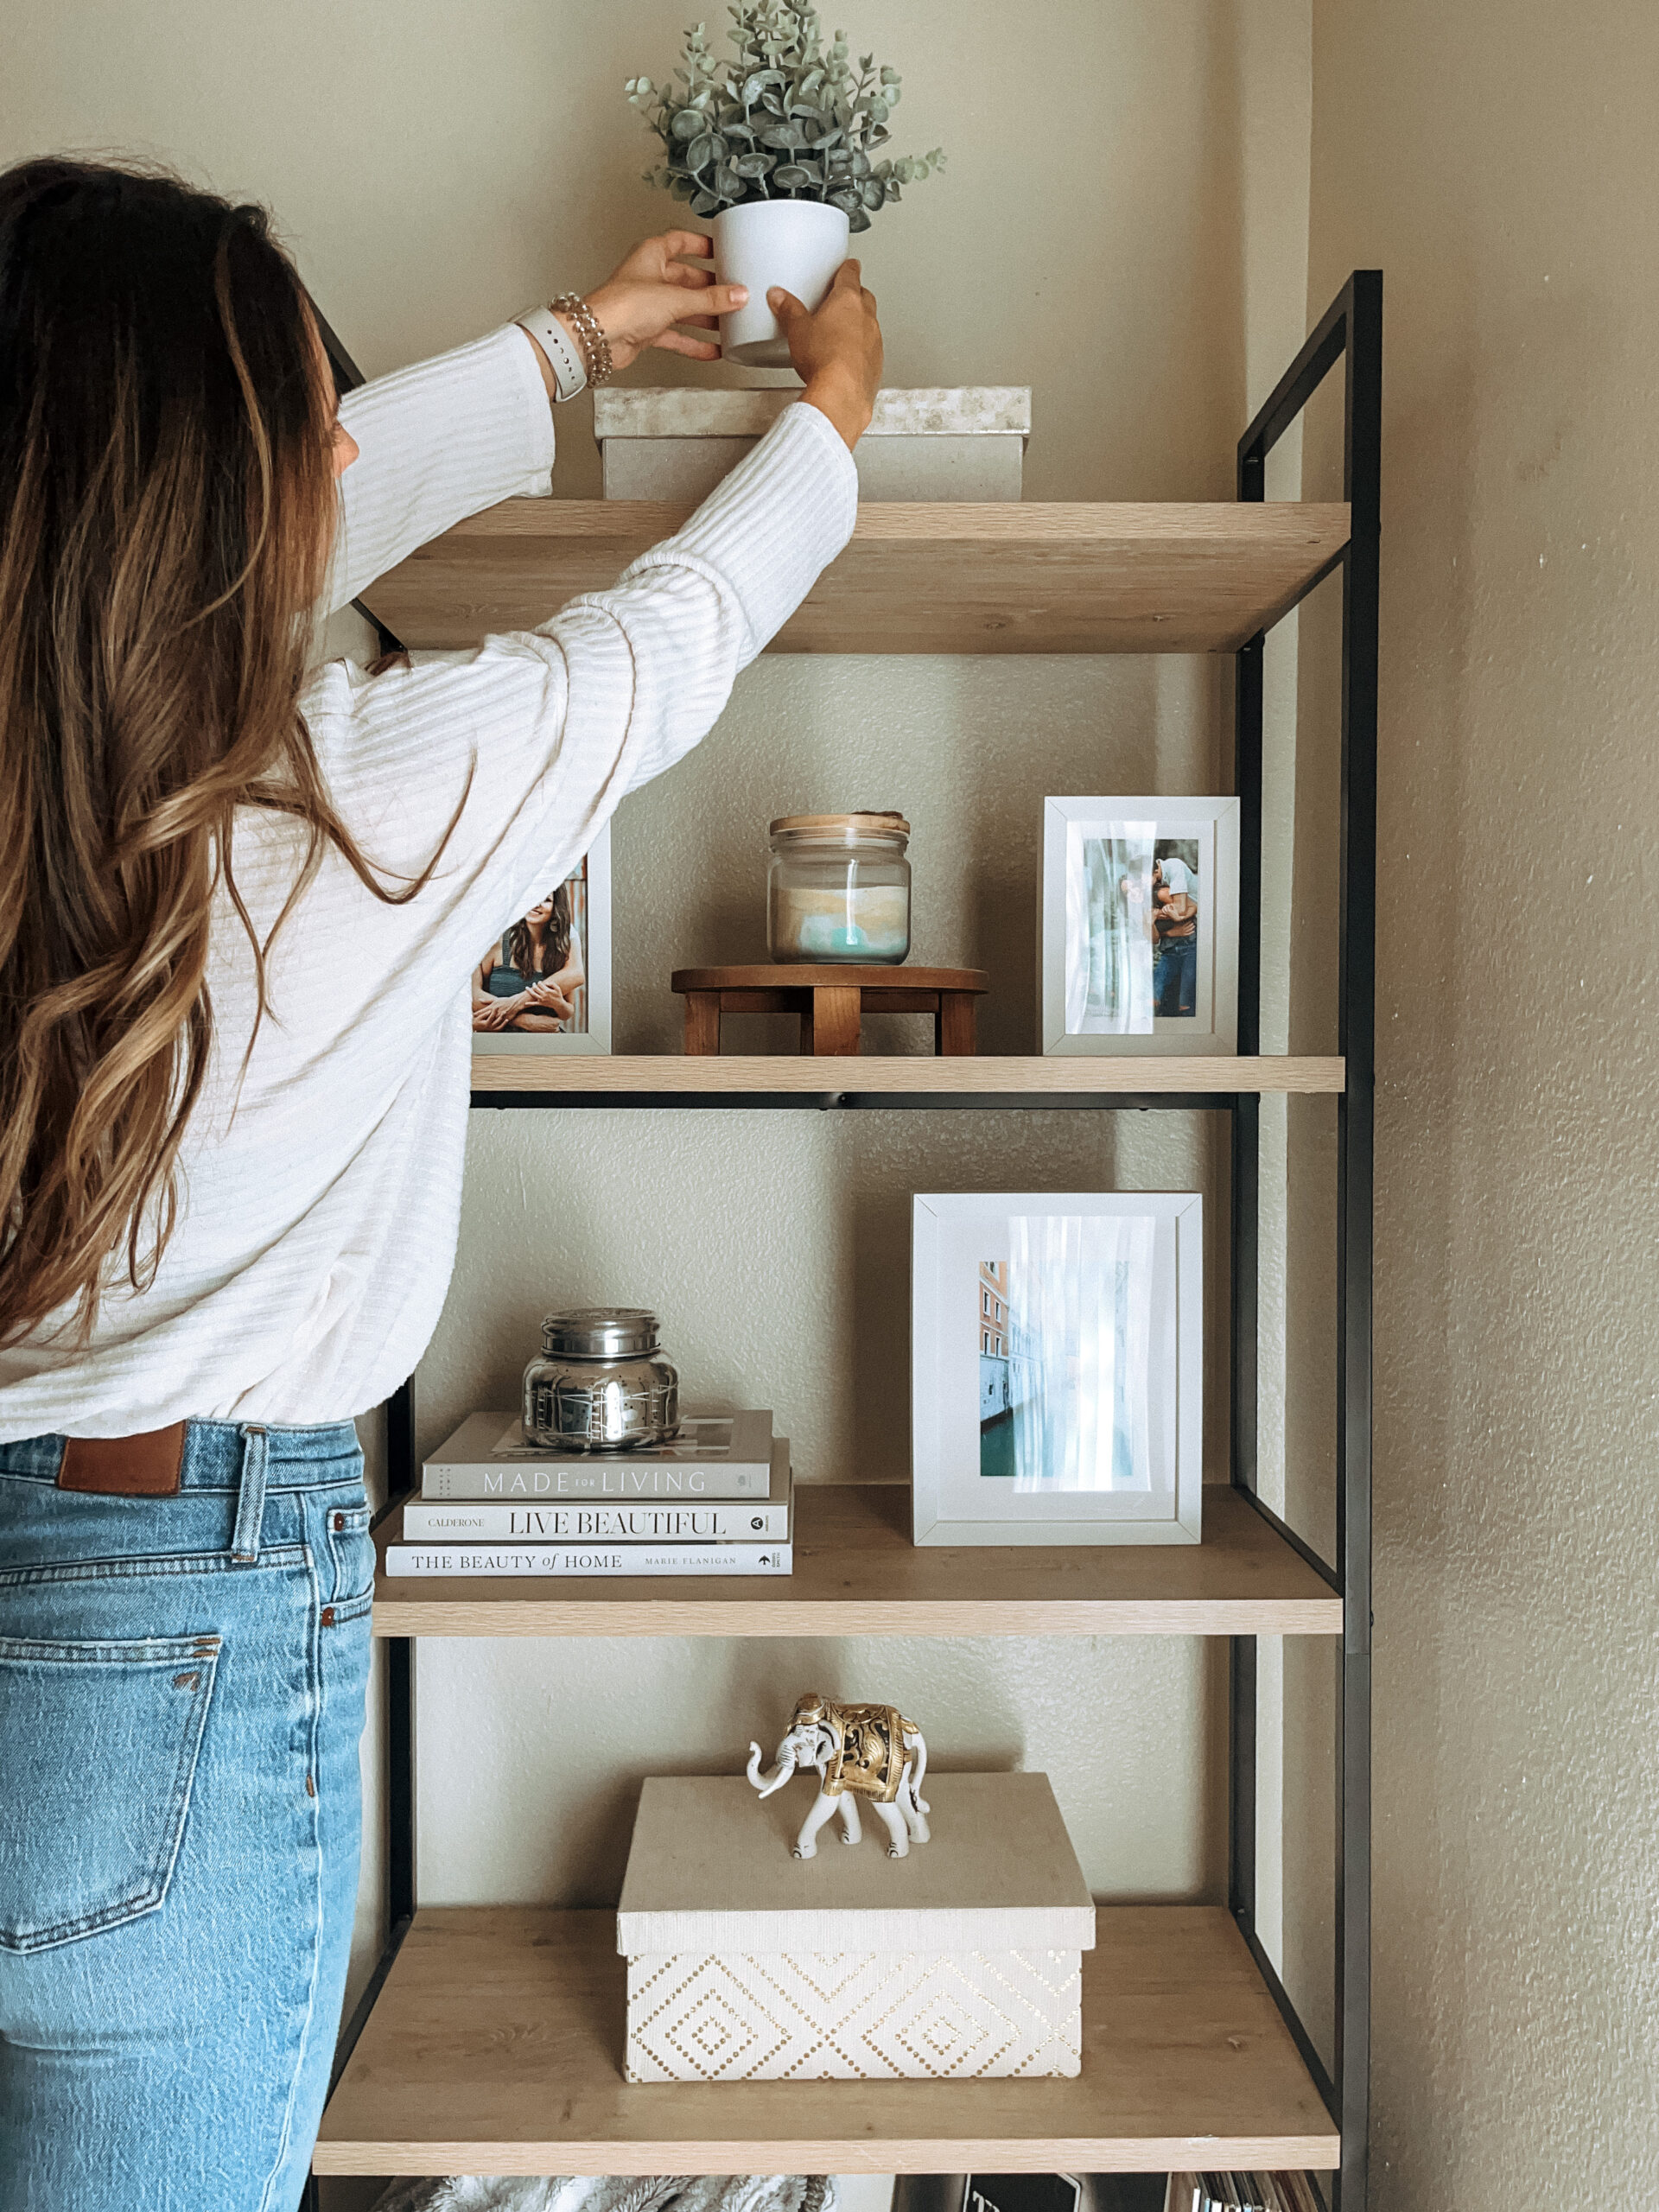 How To Style A Bookshelf